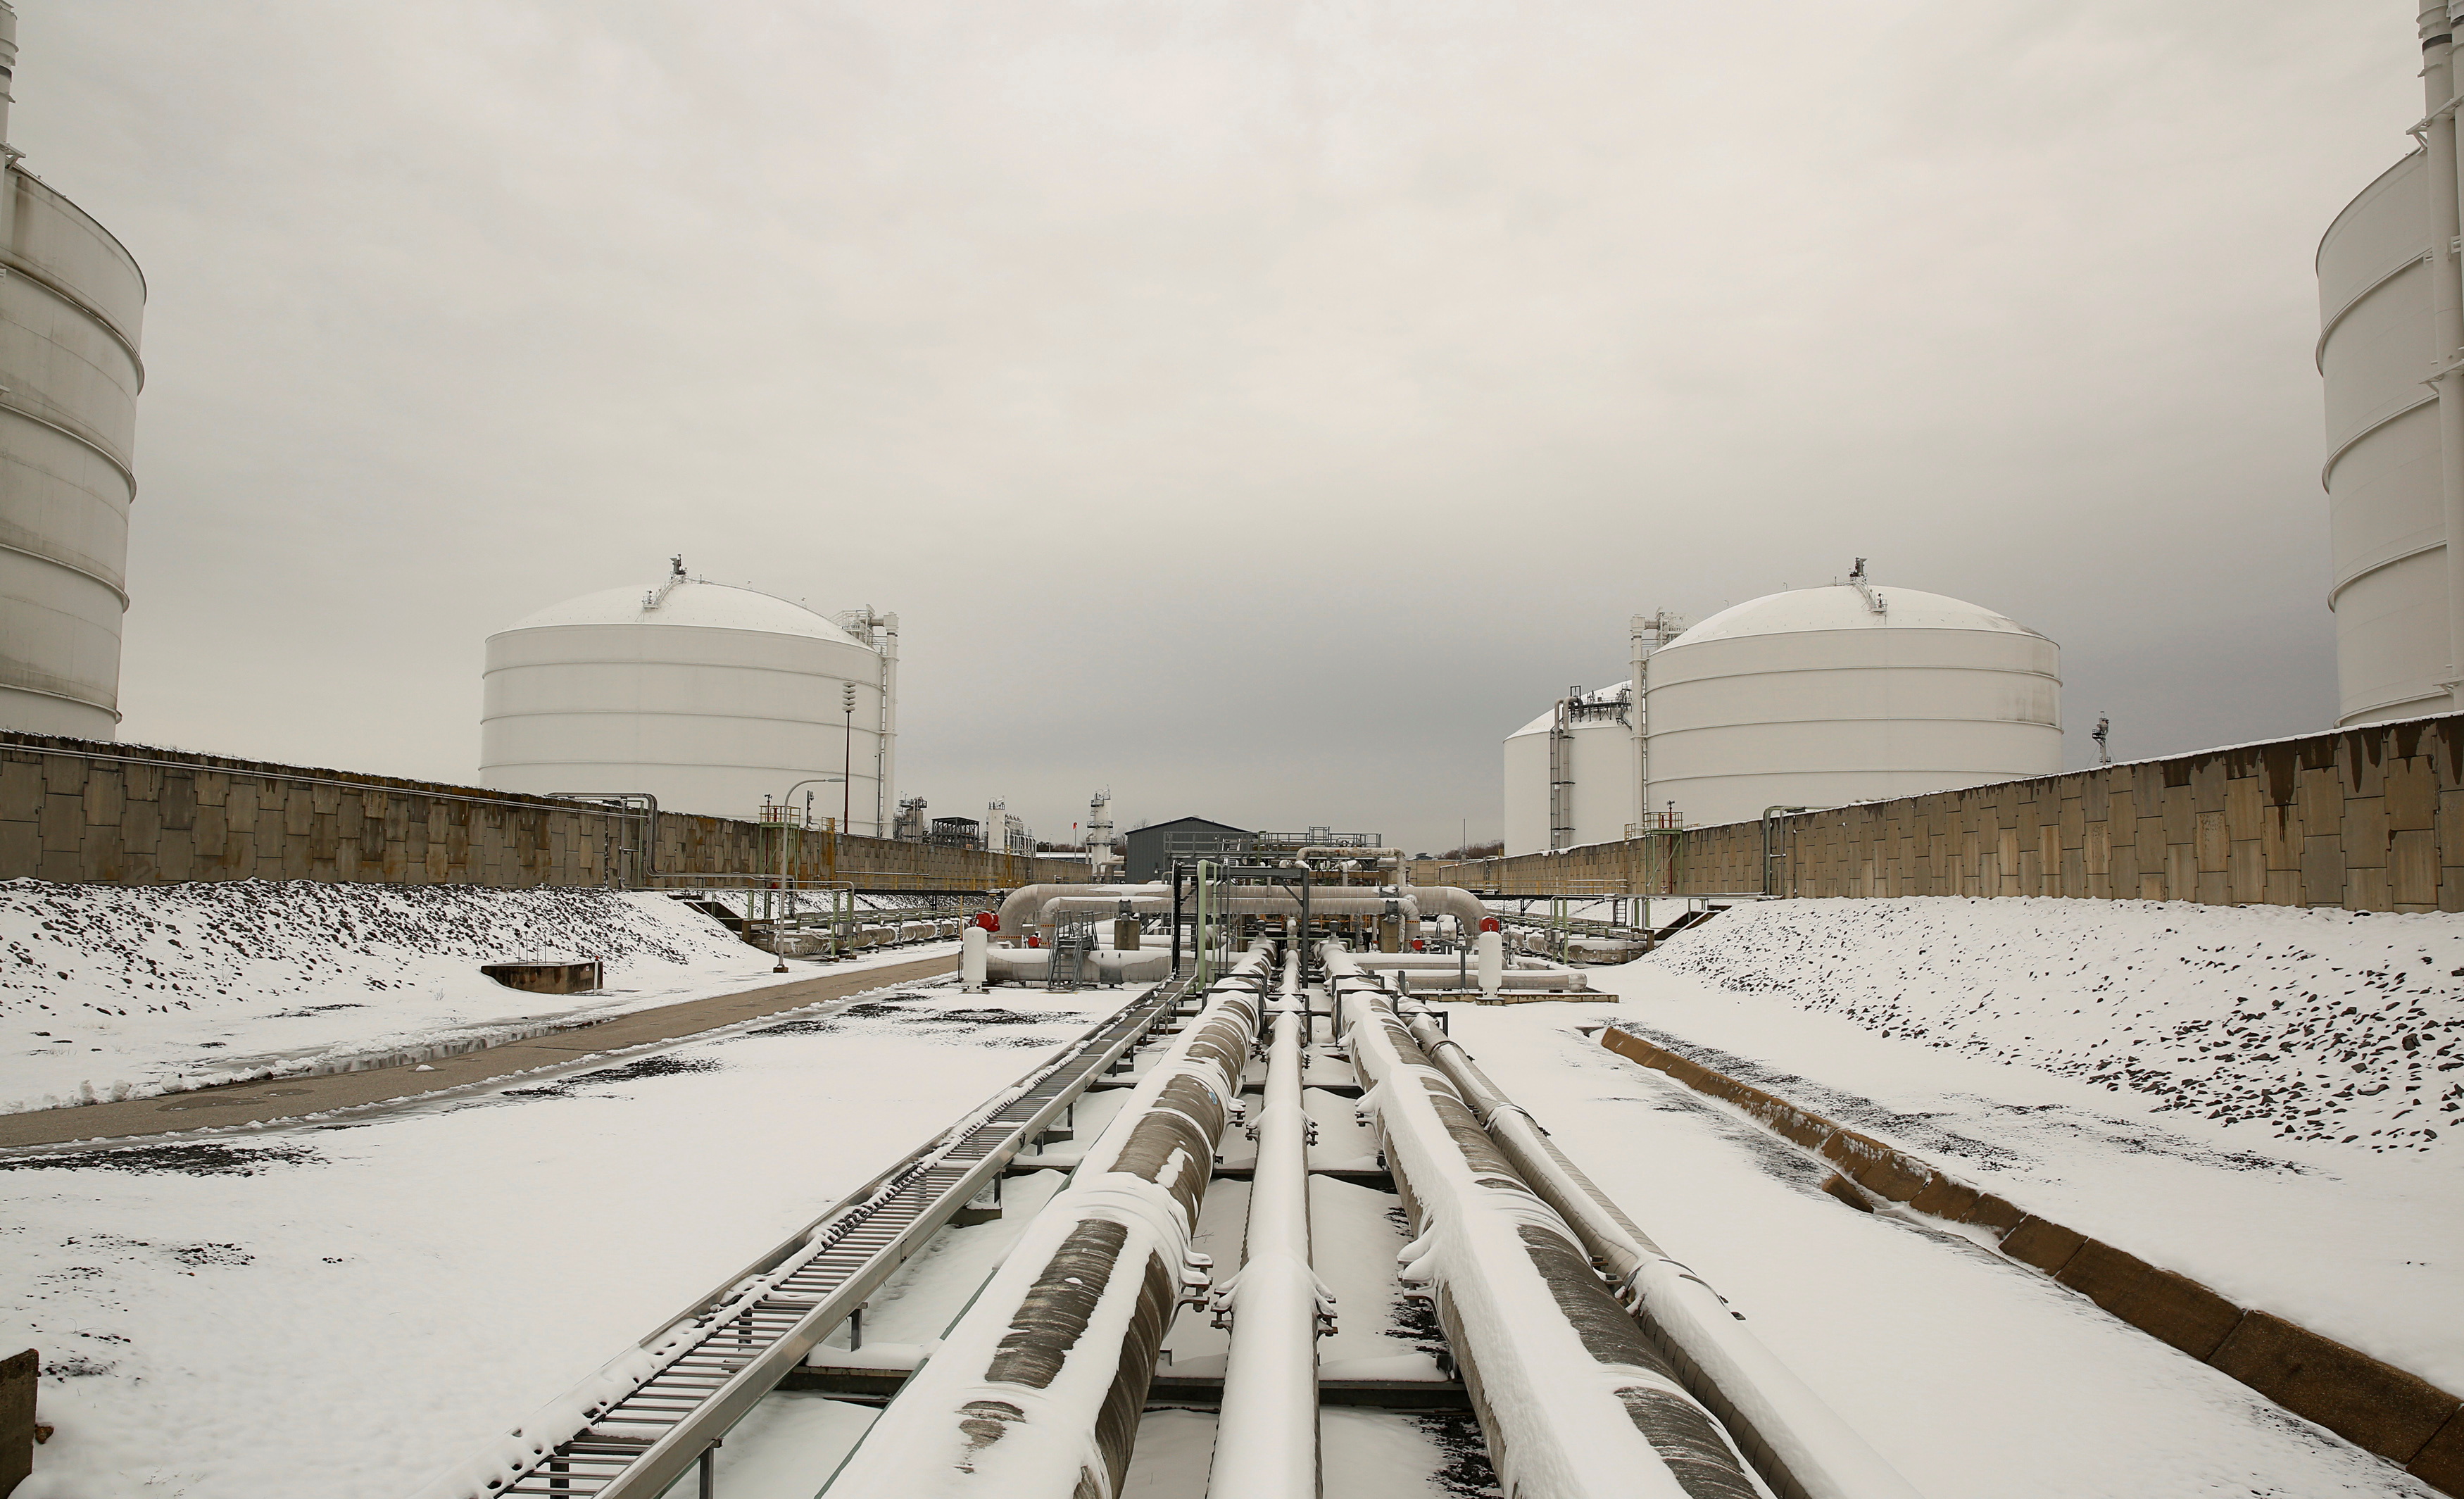 Snow covered transfer lines leading to storage tanks at the Dominion Cove Point Liquefied Natural Gas (LNG) terminal in Lusby, Maryland, March 18, 2014. REUTERS/Gary Cameron/File Photo